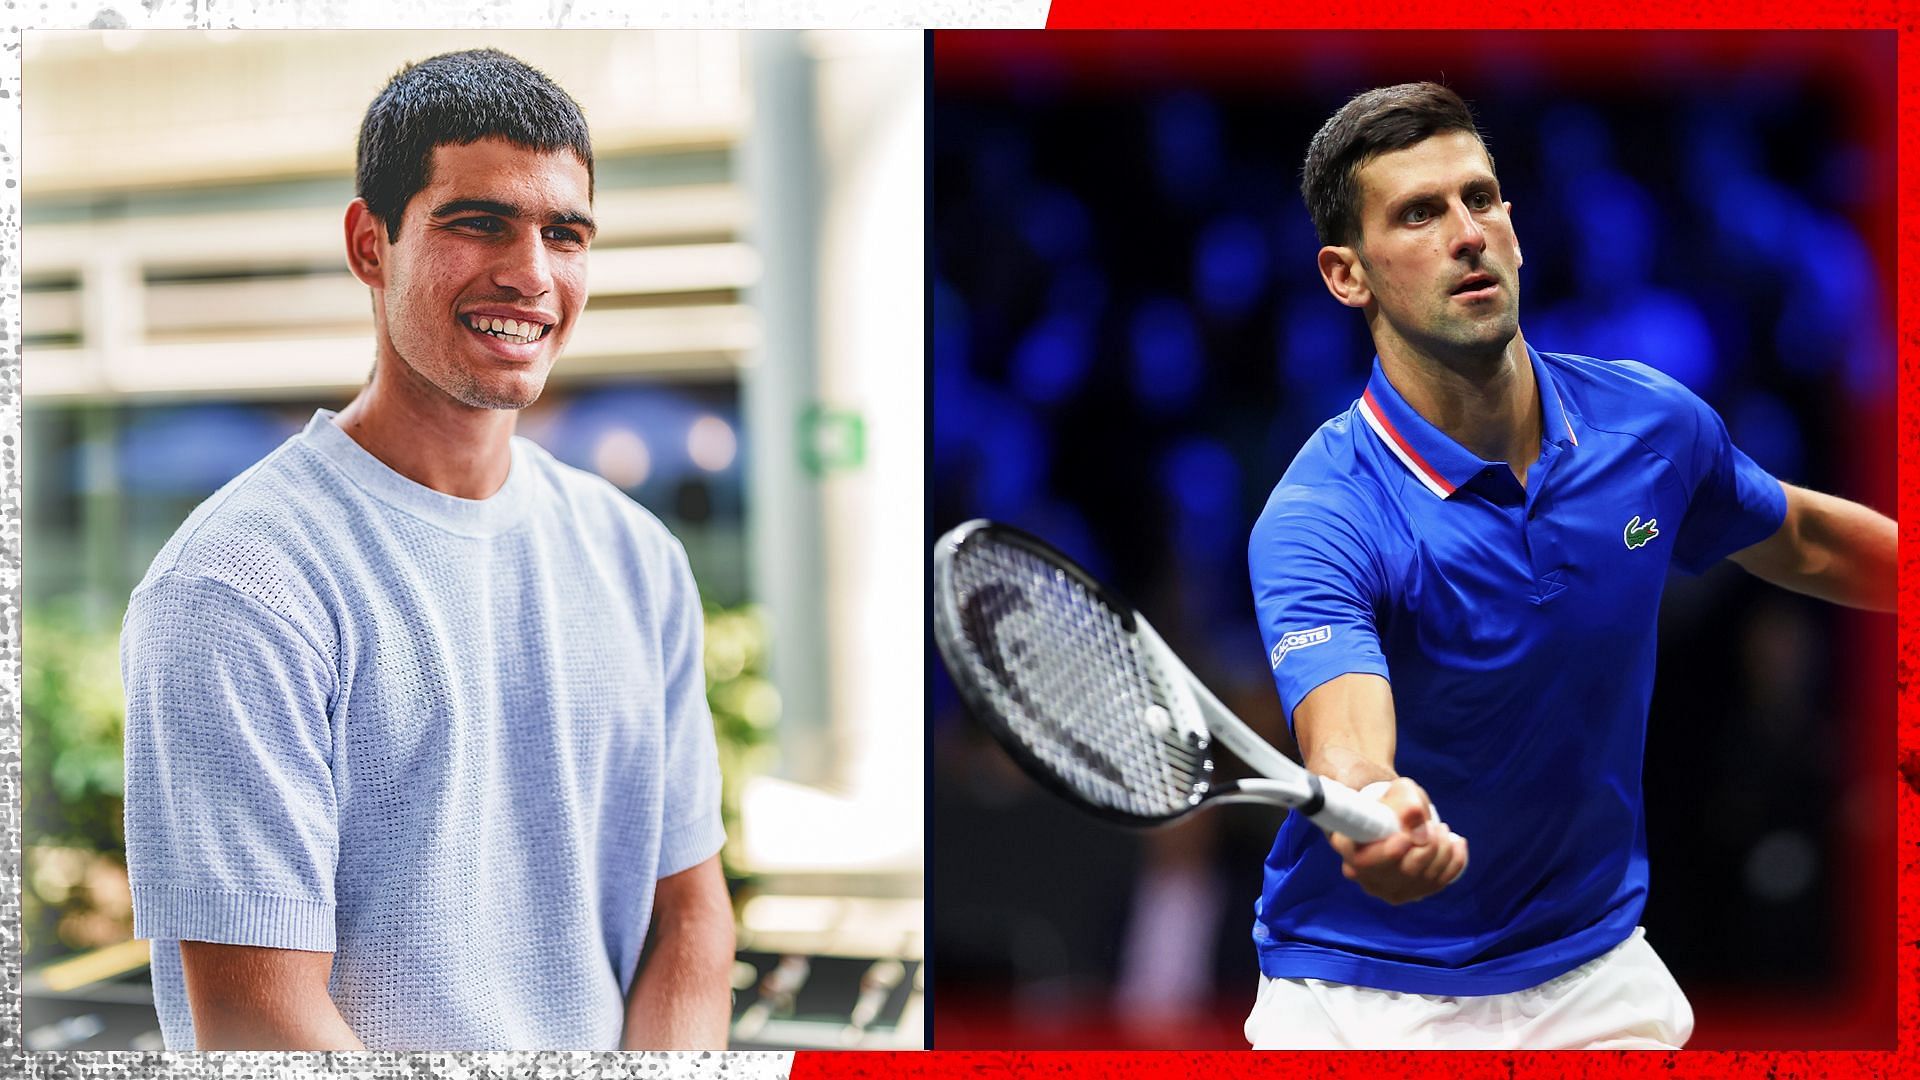 Carlos Alcaraz (left) has hailed Novak Djokovic for staying at the top for a long time.